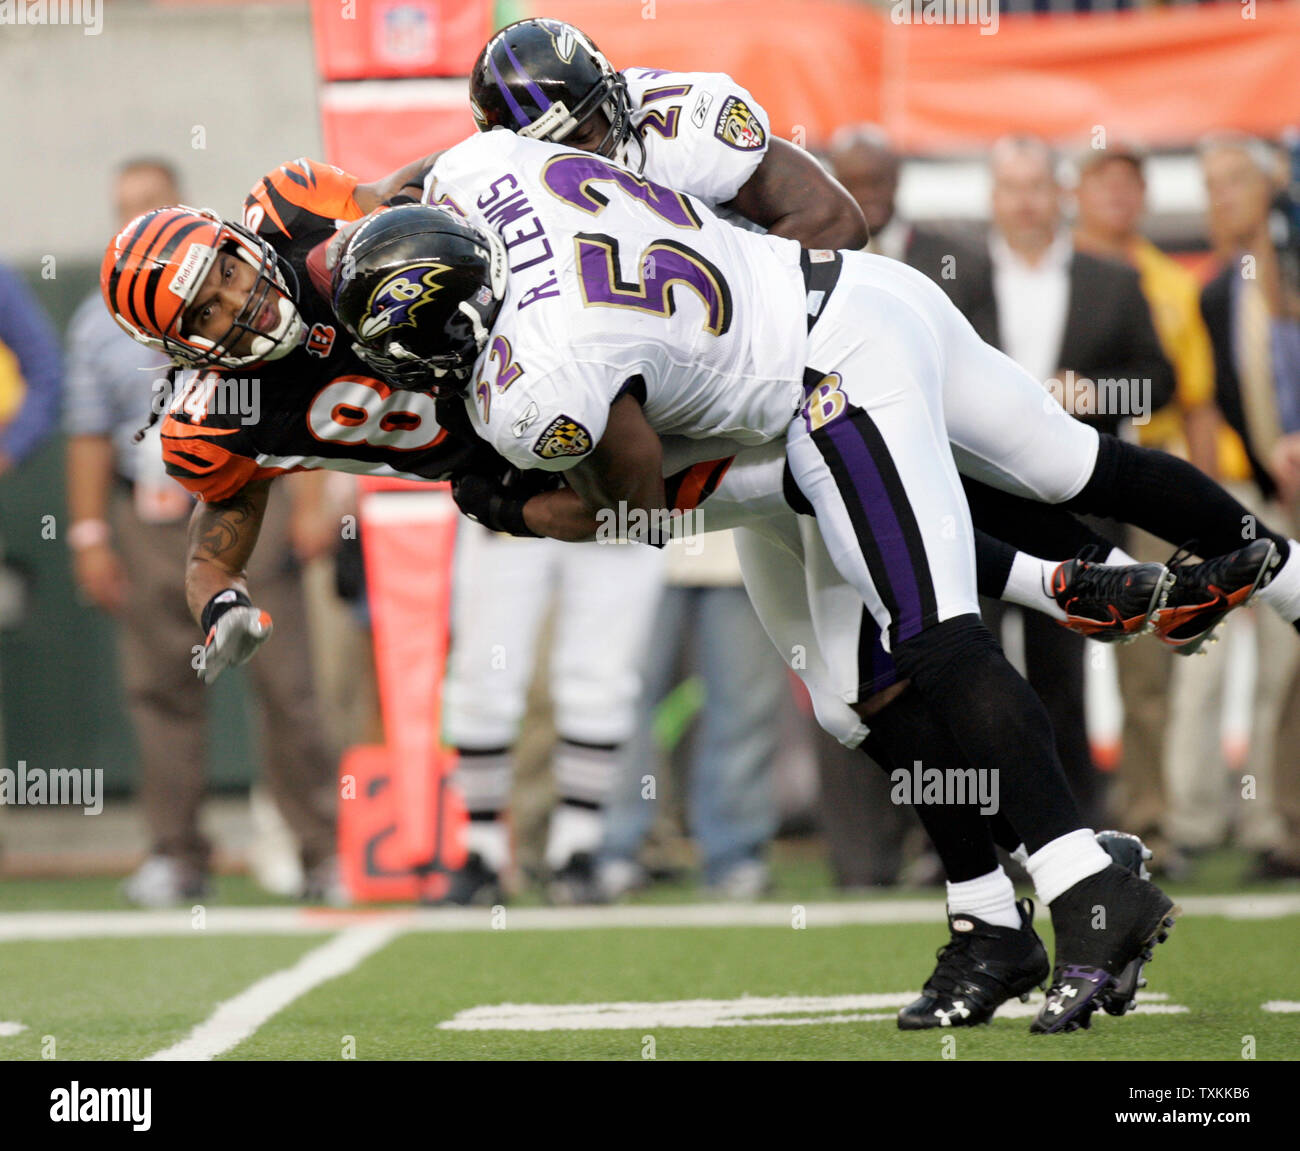 Cincinnati Bengals wide receiver T.J. Houshmandzadeh (L) is tackled by Baltimore Ravens Ray Lewis (52) and Chris McAlister (21) after a 12-yard catch at Paul Brown Stadium in Cincinnati on September 10, 2007. (UPI Photo/Mark Cowan) Stock Photo